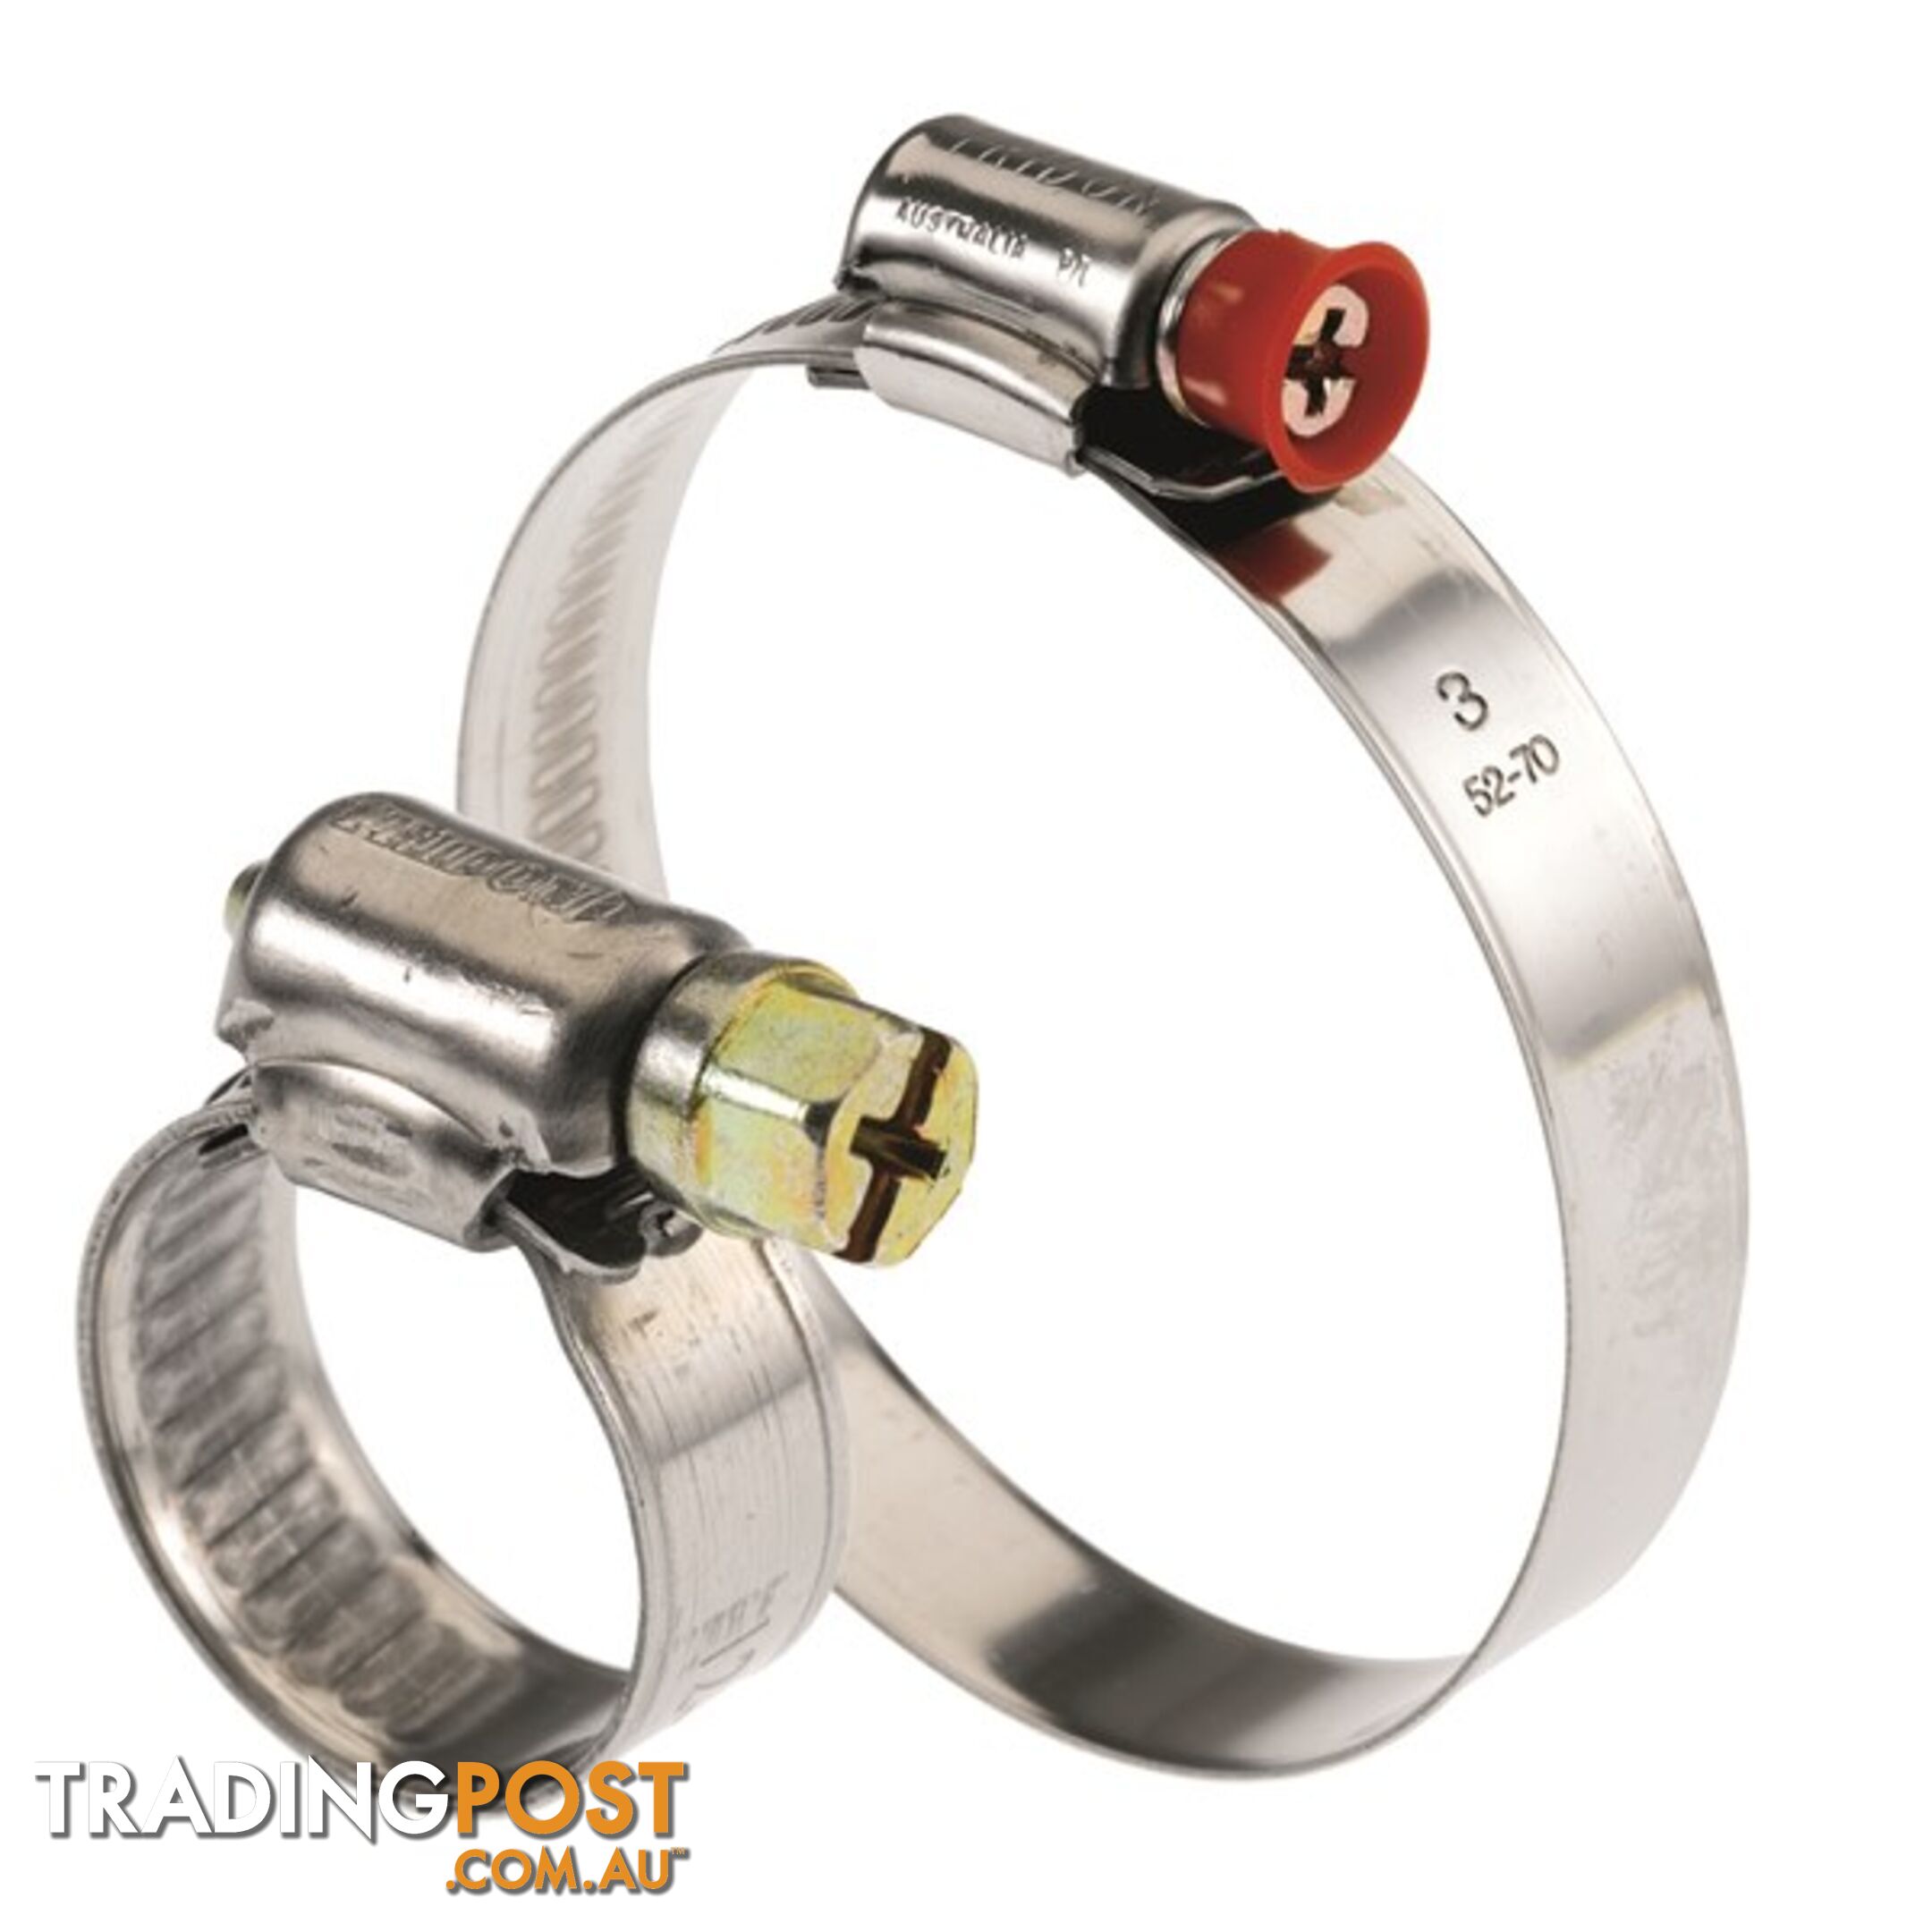 Tridon Part SS Hose Clamp 65mm-90mm Solid Band Collared 10pk SKU - MPC4P